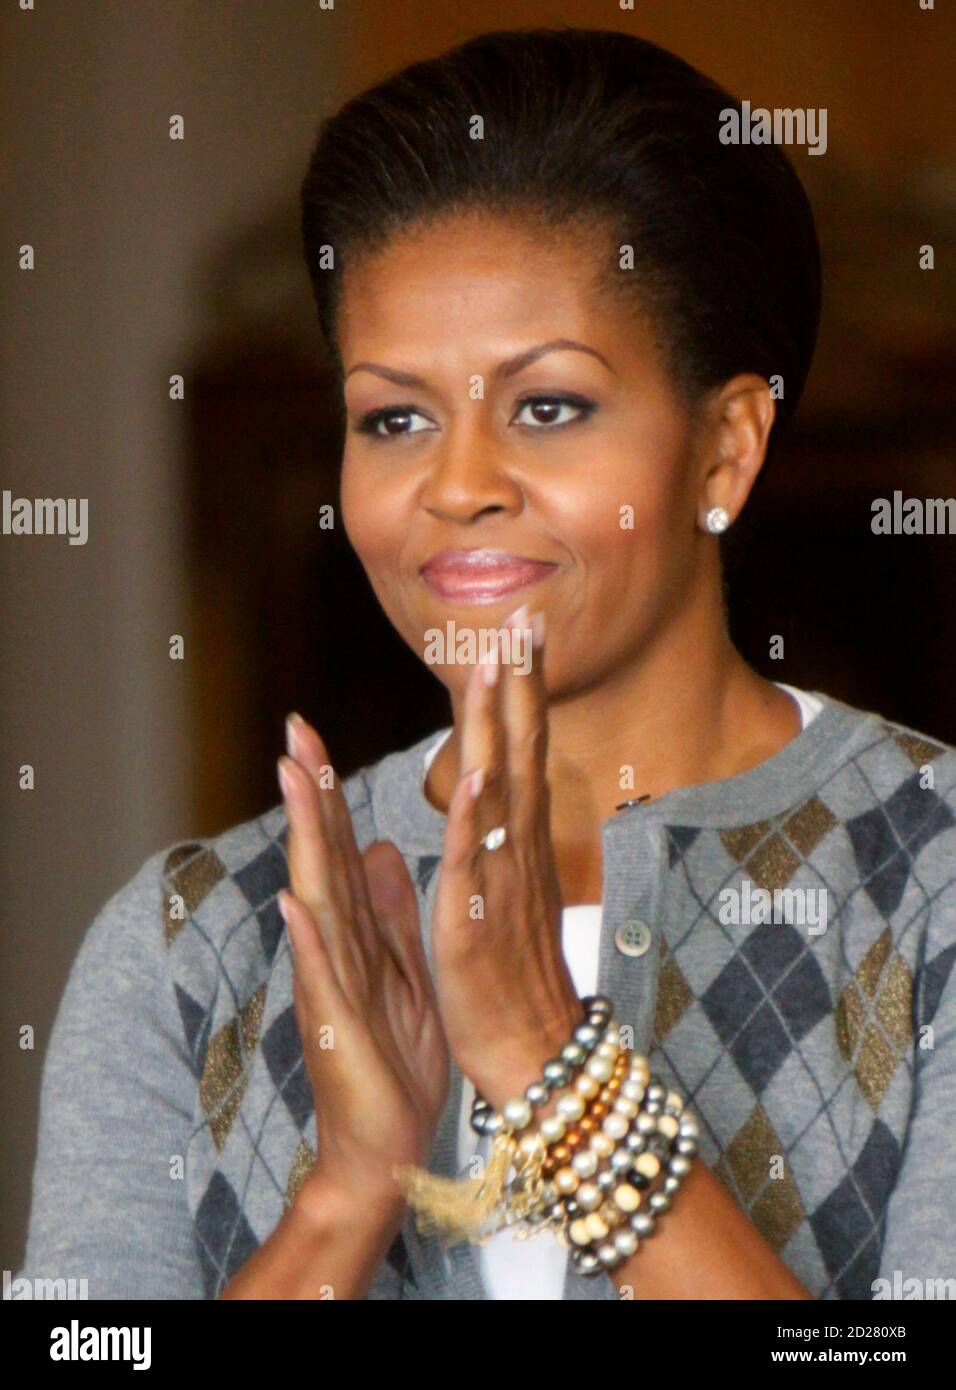 U.S. first lady Michelle Obama applauds before speaking at a Girls Mentoring Luncheon at the Governor's Mansion in Denver, Colorado November 16, 2009. REUTERS/Rick Wilking (UNITED STATES POLITICS EDUCATION) Stock Photo